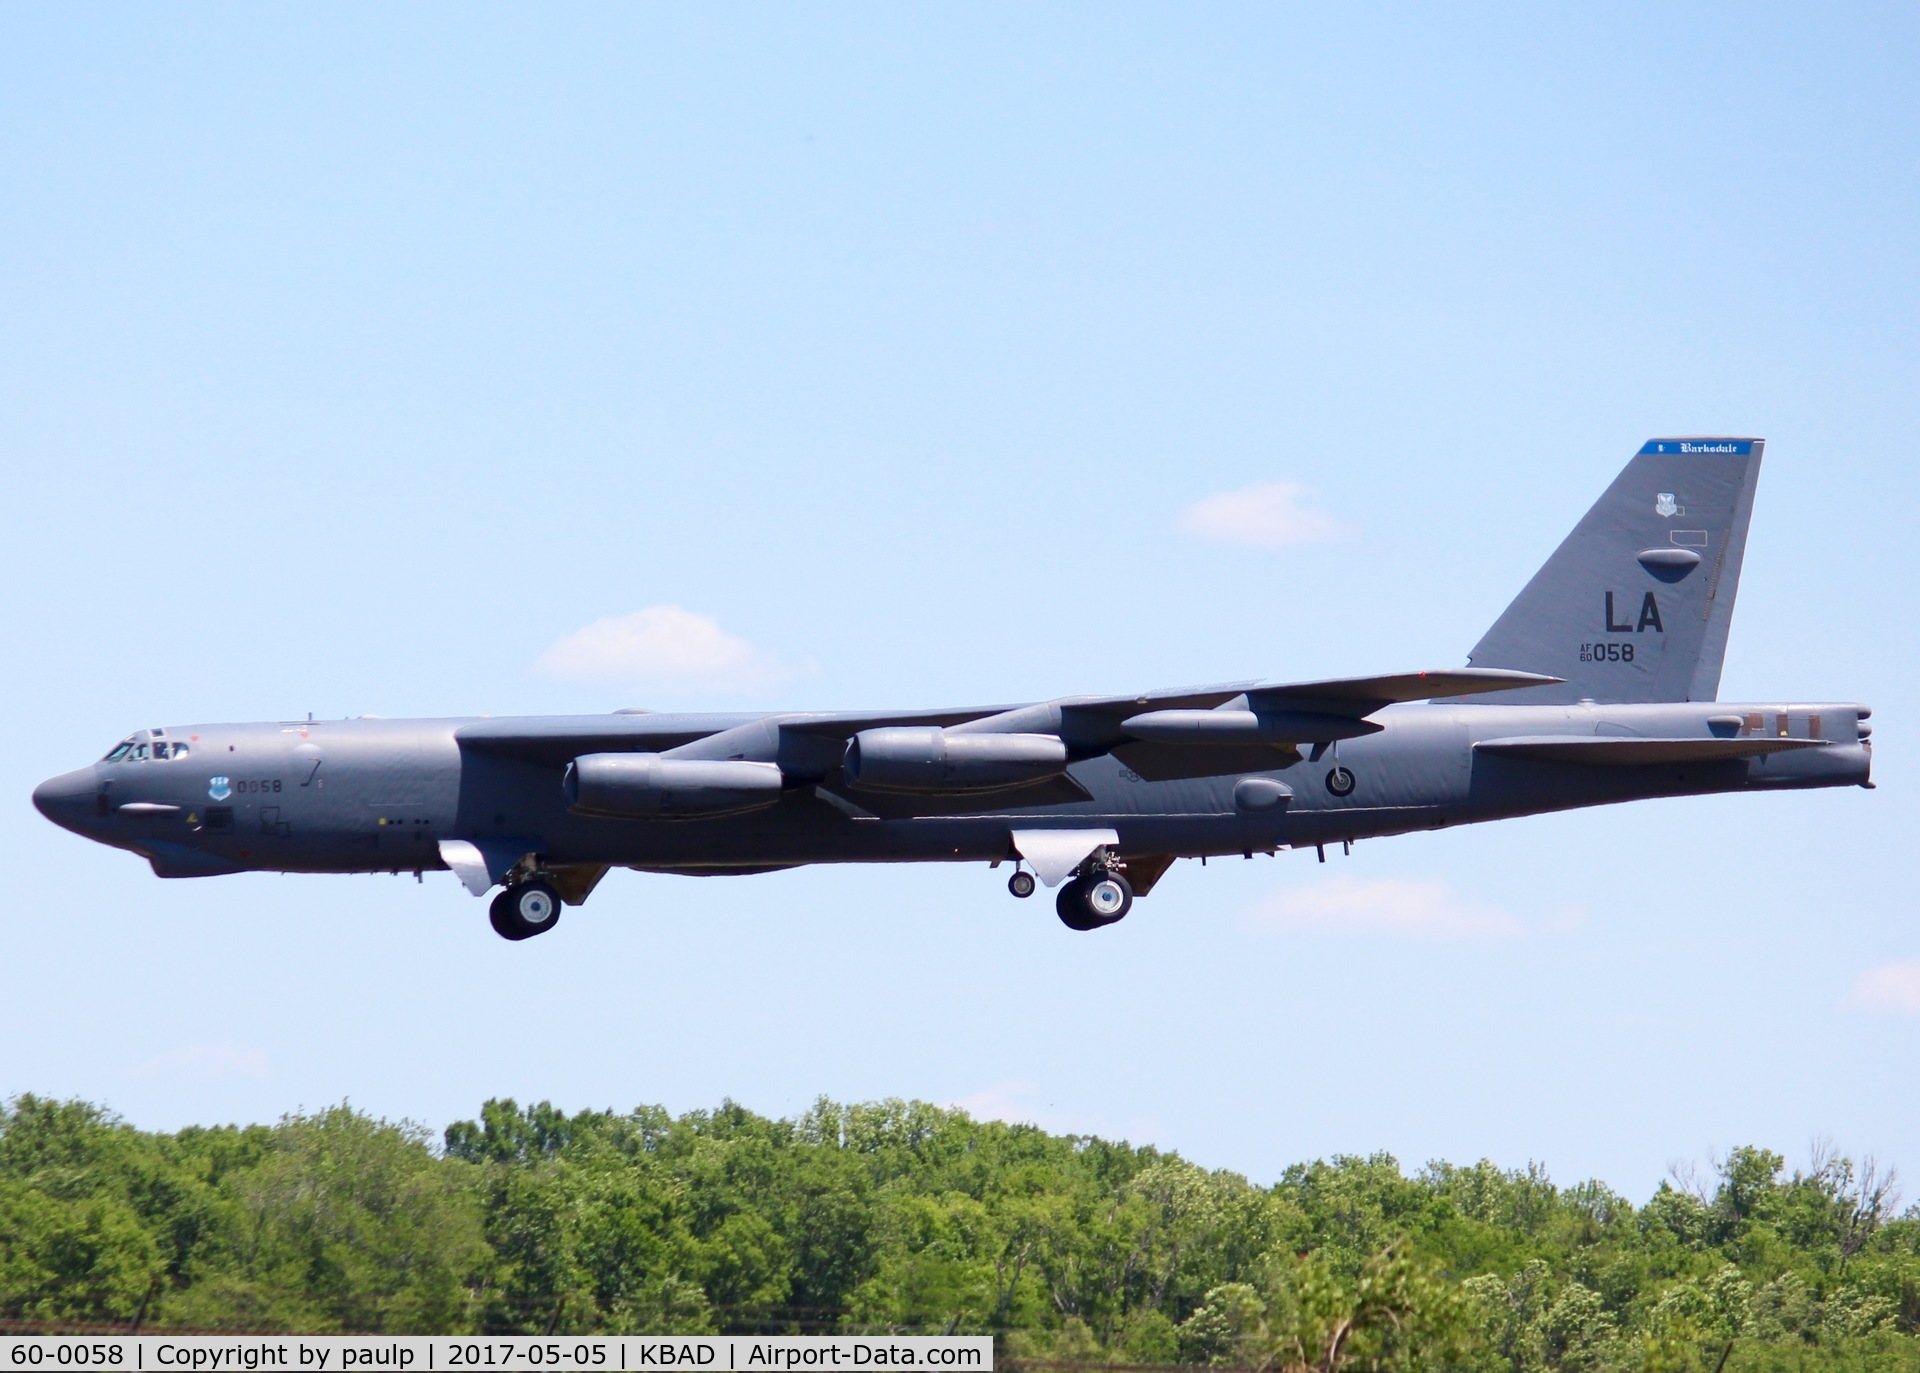 60-0058, 1960 Boeing B-52H-160-BW Stratofortress C/N 464423, At Barksdale Air Force Base.